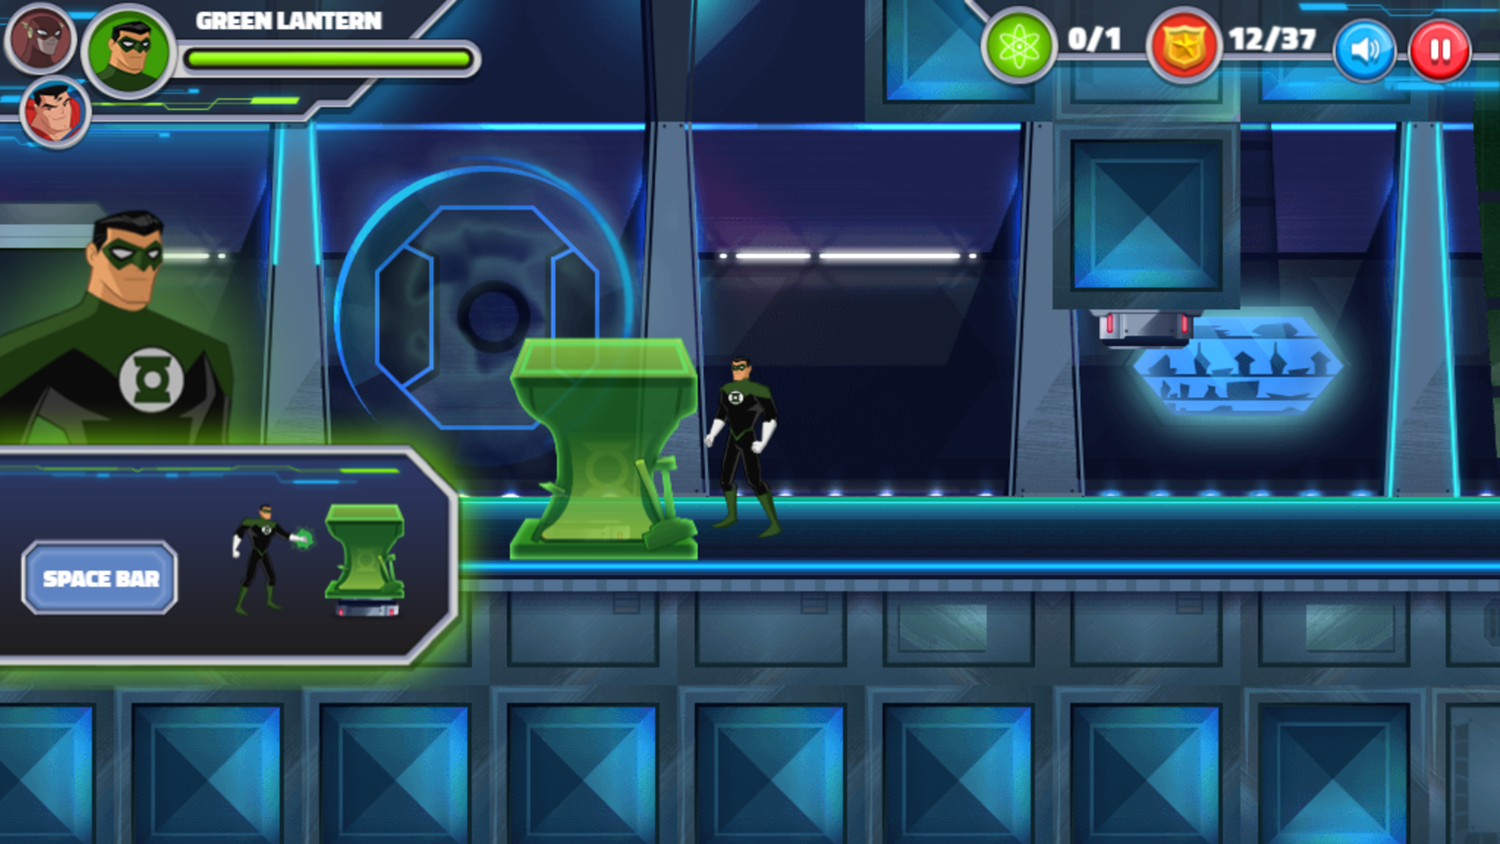 Justice League Action Nuclear Rescue Game Green Lantern Power Screenshot.